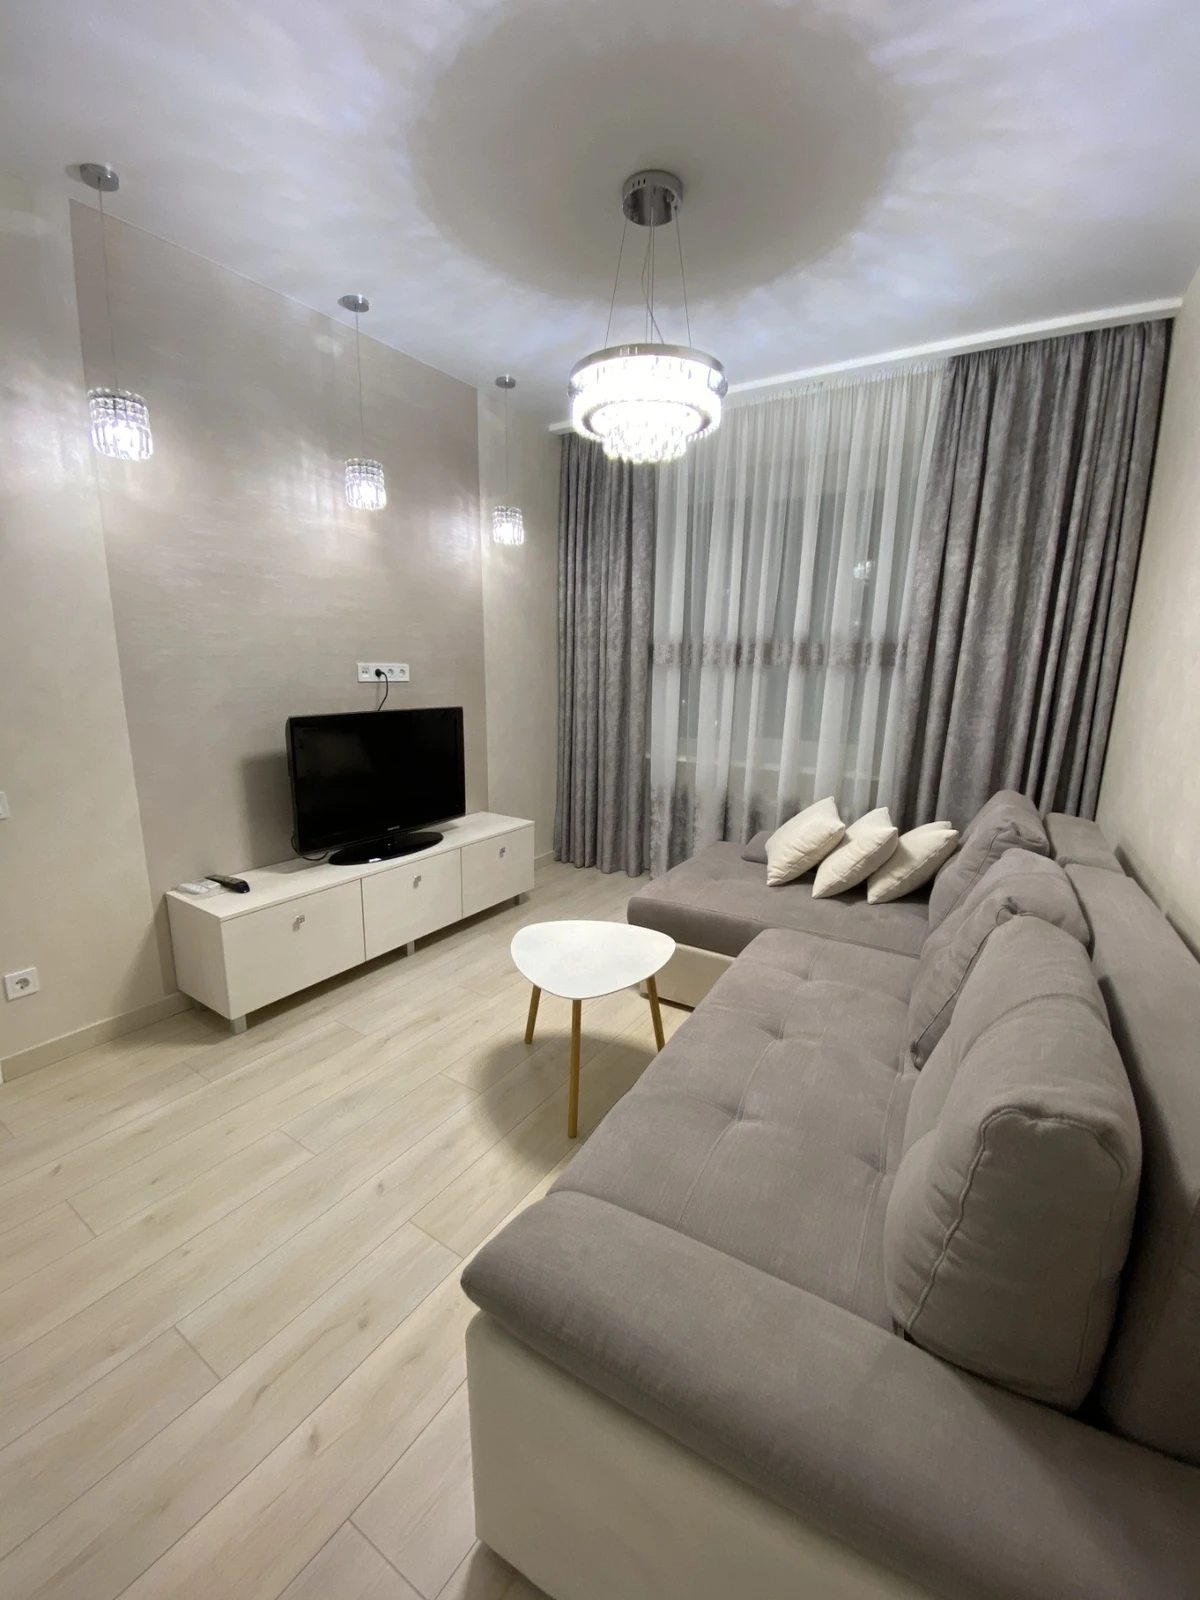 Apartment for rent. 2 rooms, 53 m², 2nd floor/25 floors. 16, Kamanyna ul., Odesa. 